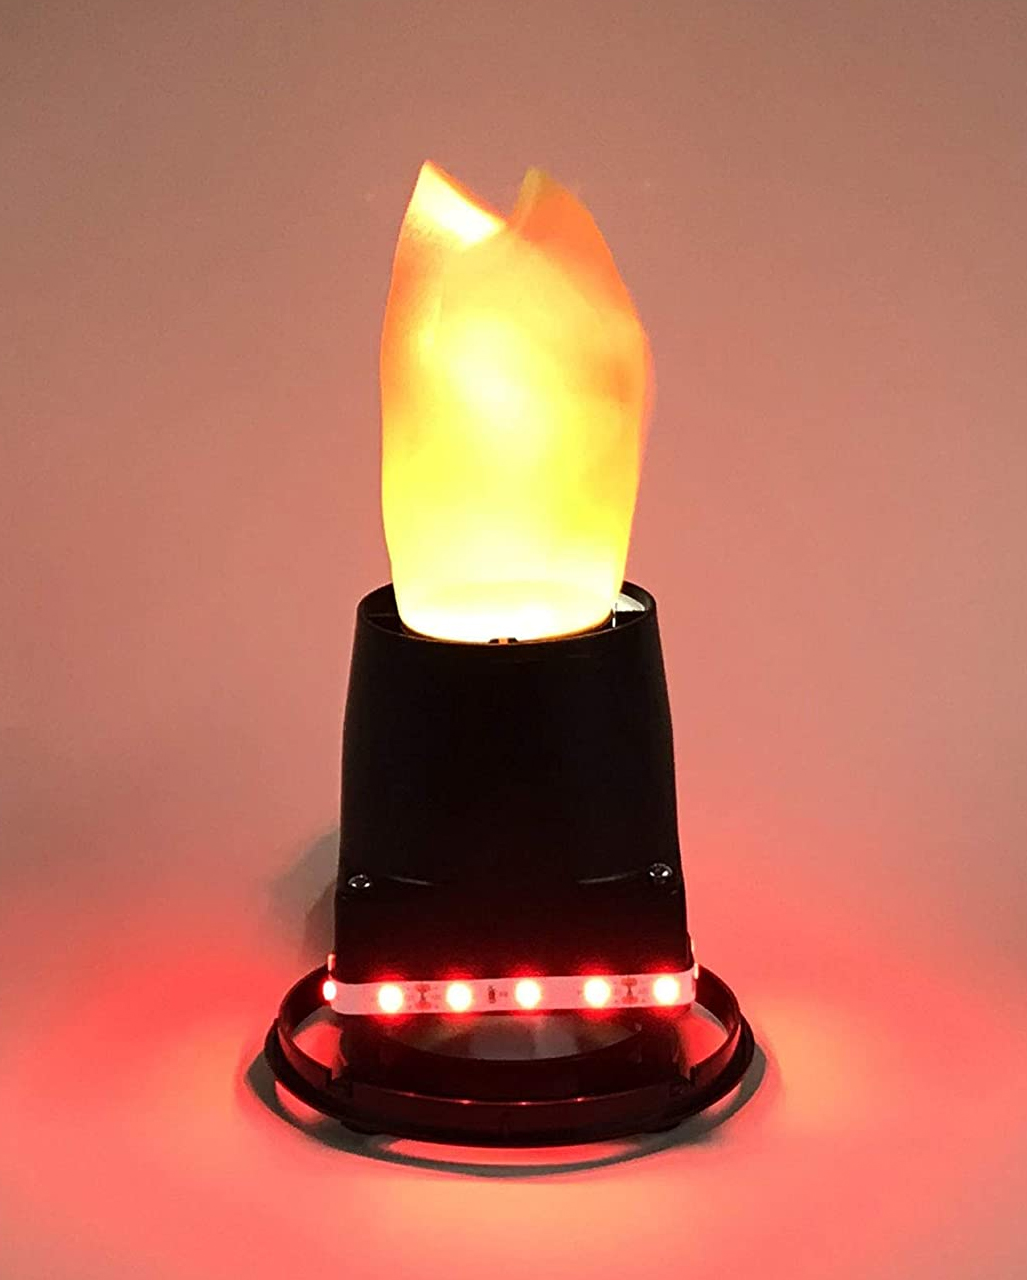 https://inst-0.cdn.shockers.de/ku_cdn/out/pictures/master/product/1/illlusions-feuerlampemit-rotem-led-effektrand-illusions-flammenlampe-mit-rotem-led-effekt-illusion-firelamp-with-red-led-lights-52816-01.jpg